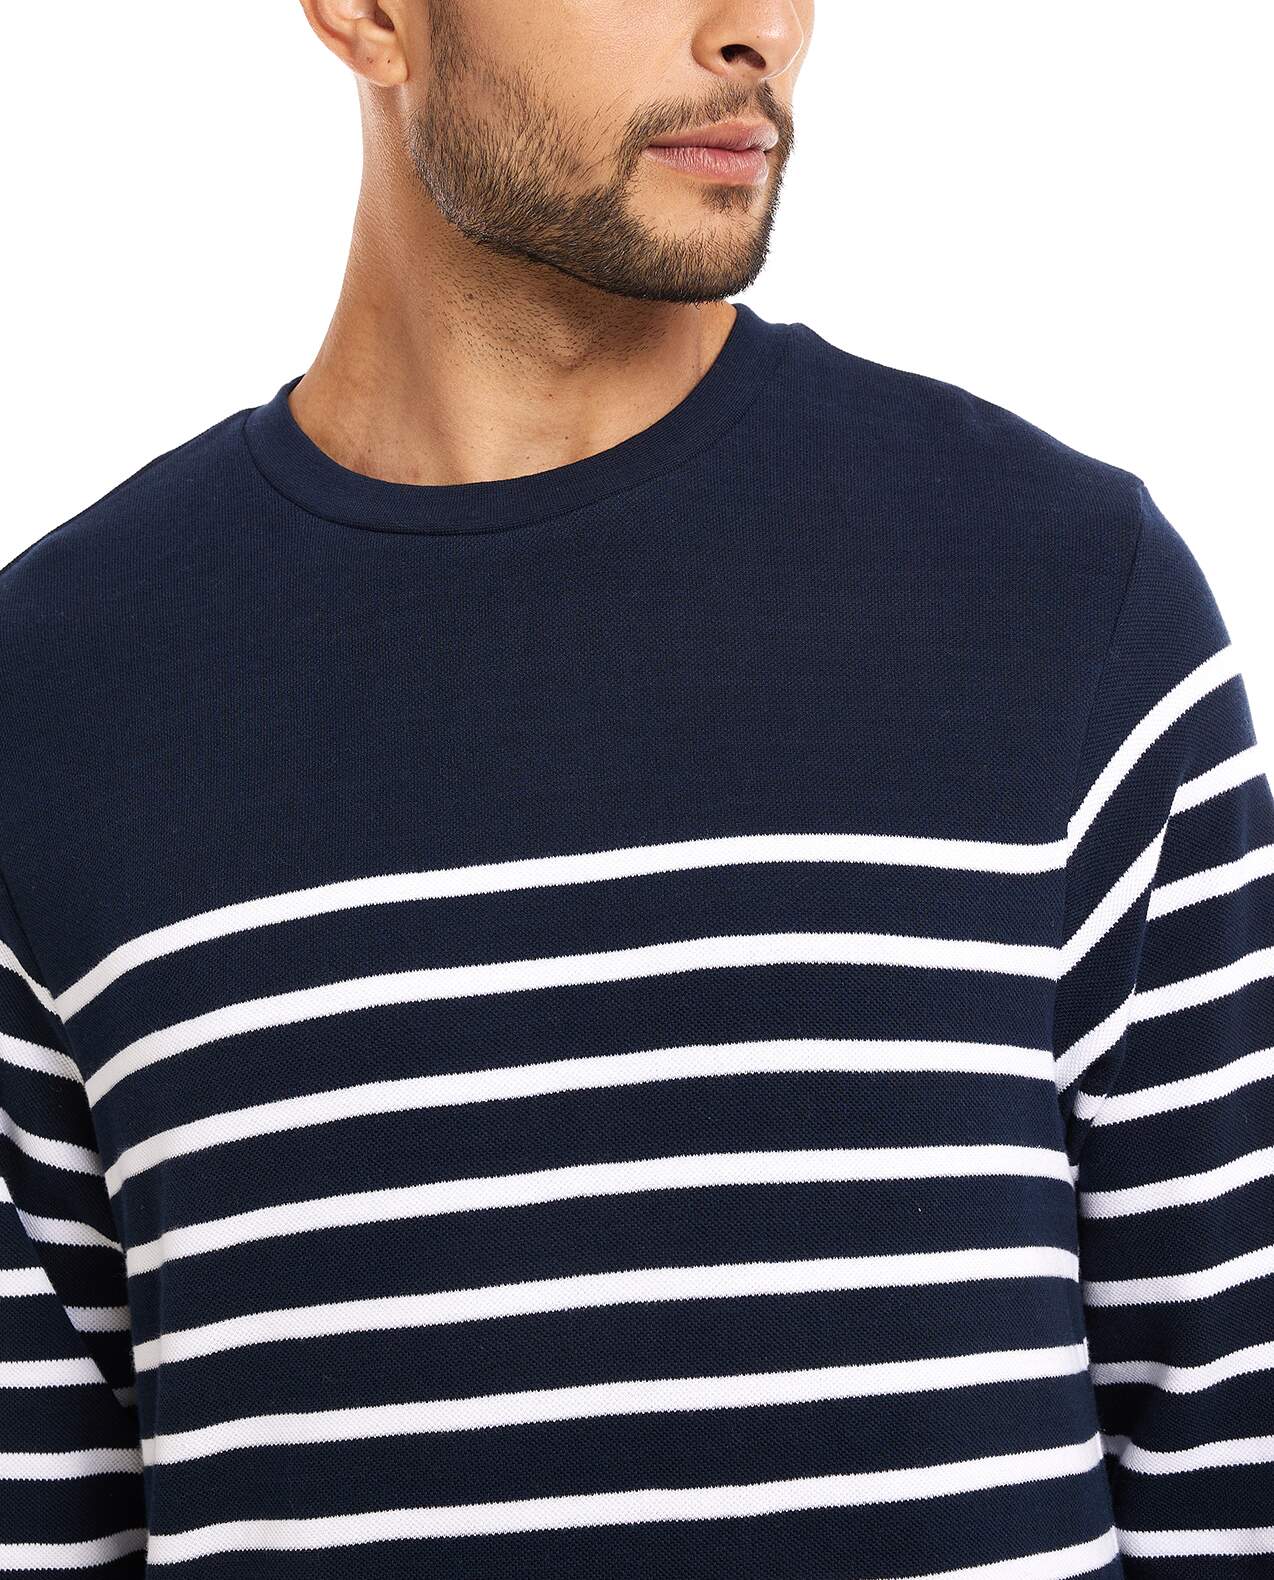 Striped T-Shirt with Crew Neck and Long Sleeves